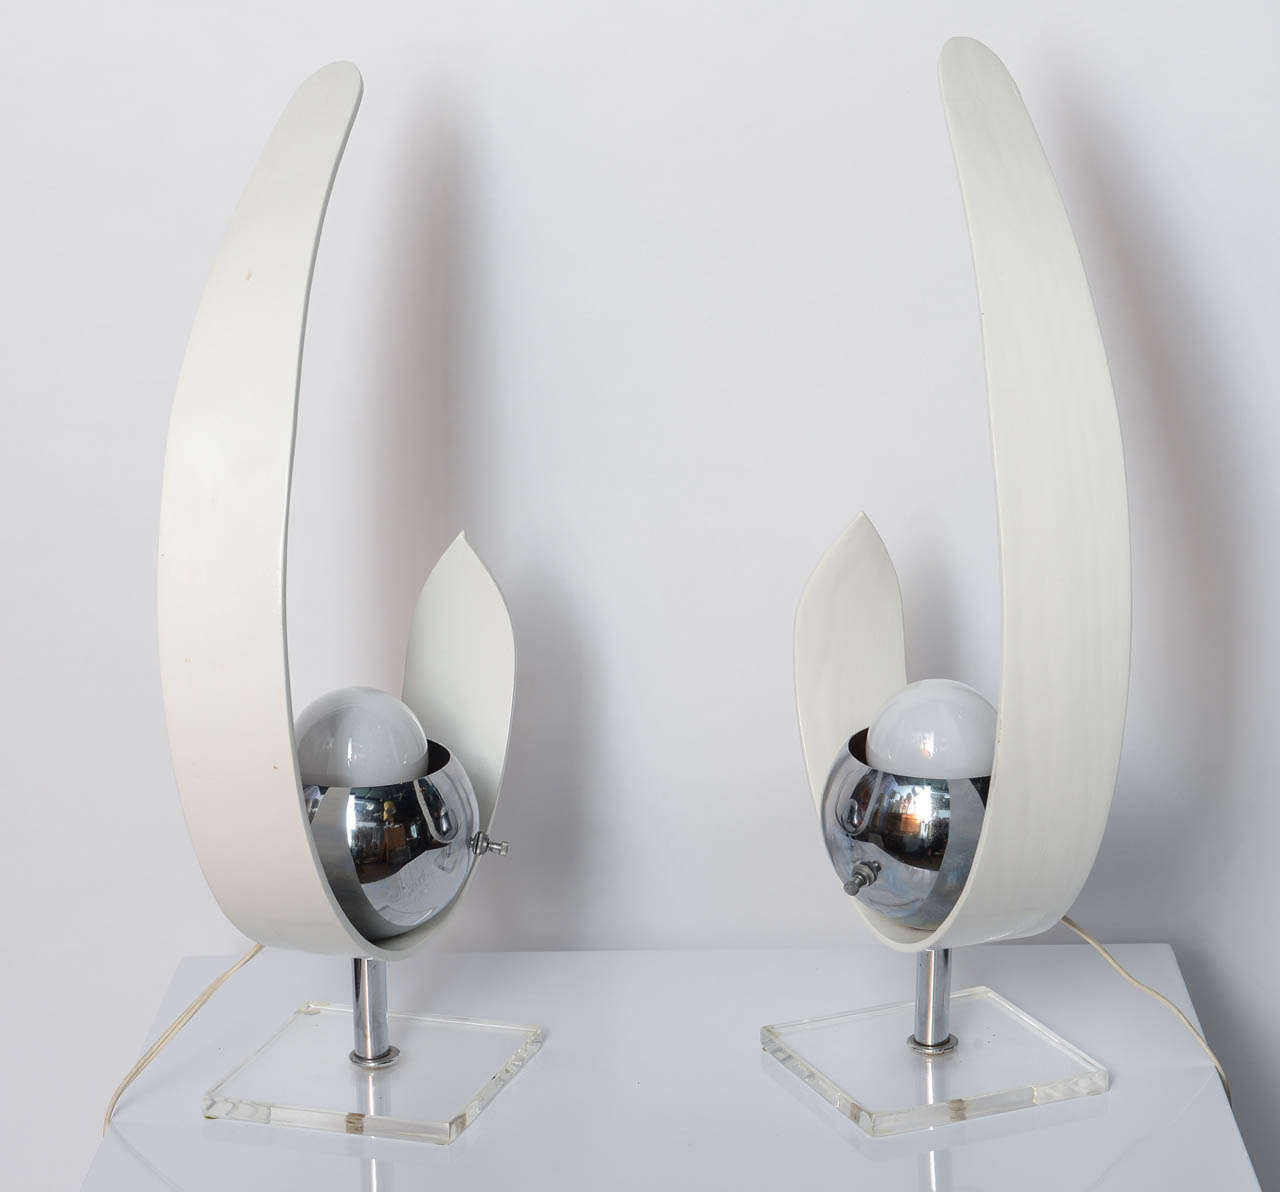 This 1960s Modernist Robert Sonneman Style Wood and Chrome Eyeball Table Lamps will bring a pretty Mid-Century touch on any furniture.
Each lamp has a metal switch on chrome bowl and has a clear acrylic base.  
The white lacquered can be lacquered